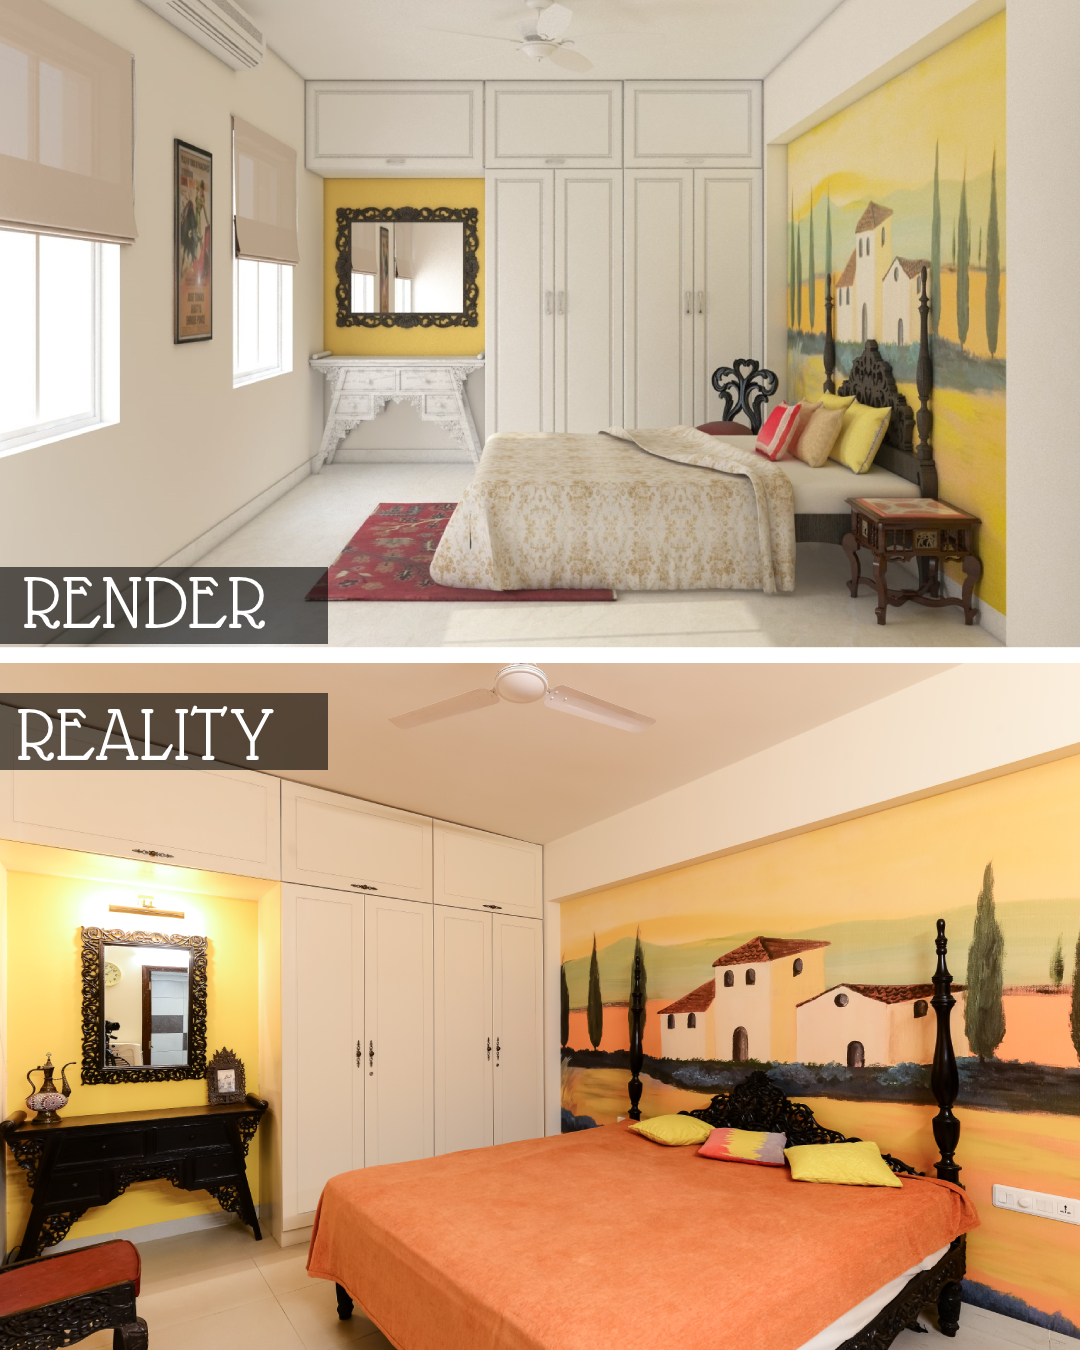 From Rendering to Reality: A Look into our Interior Design Process